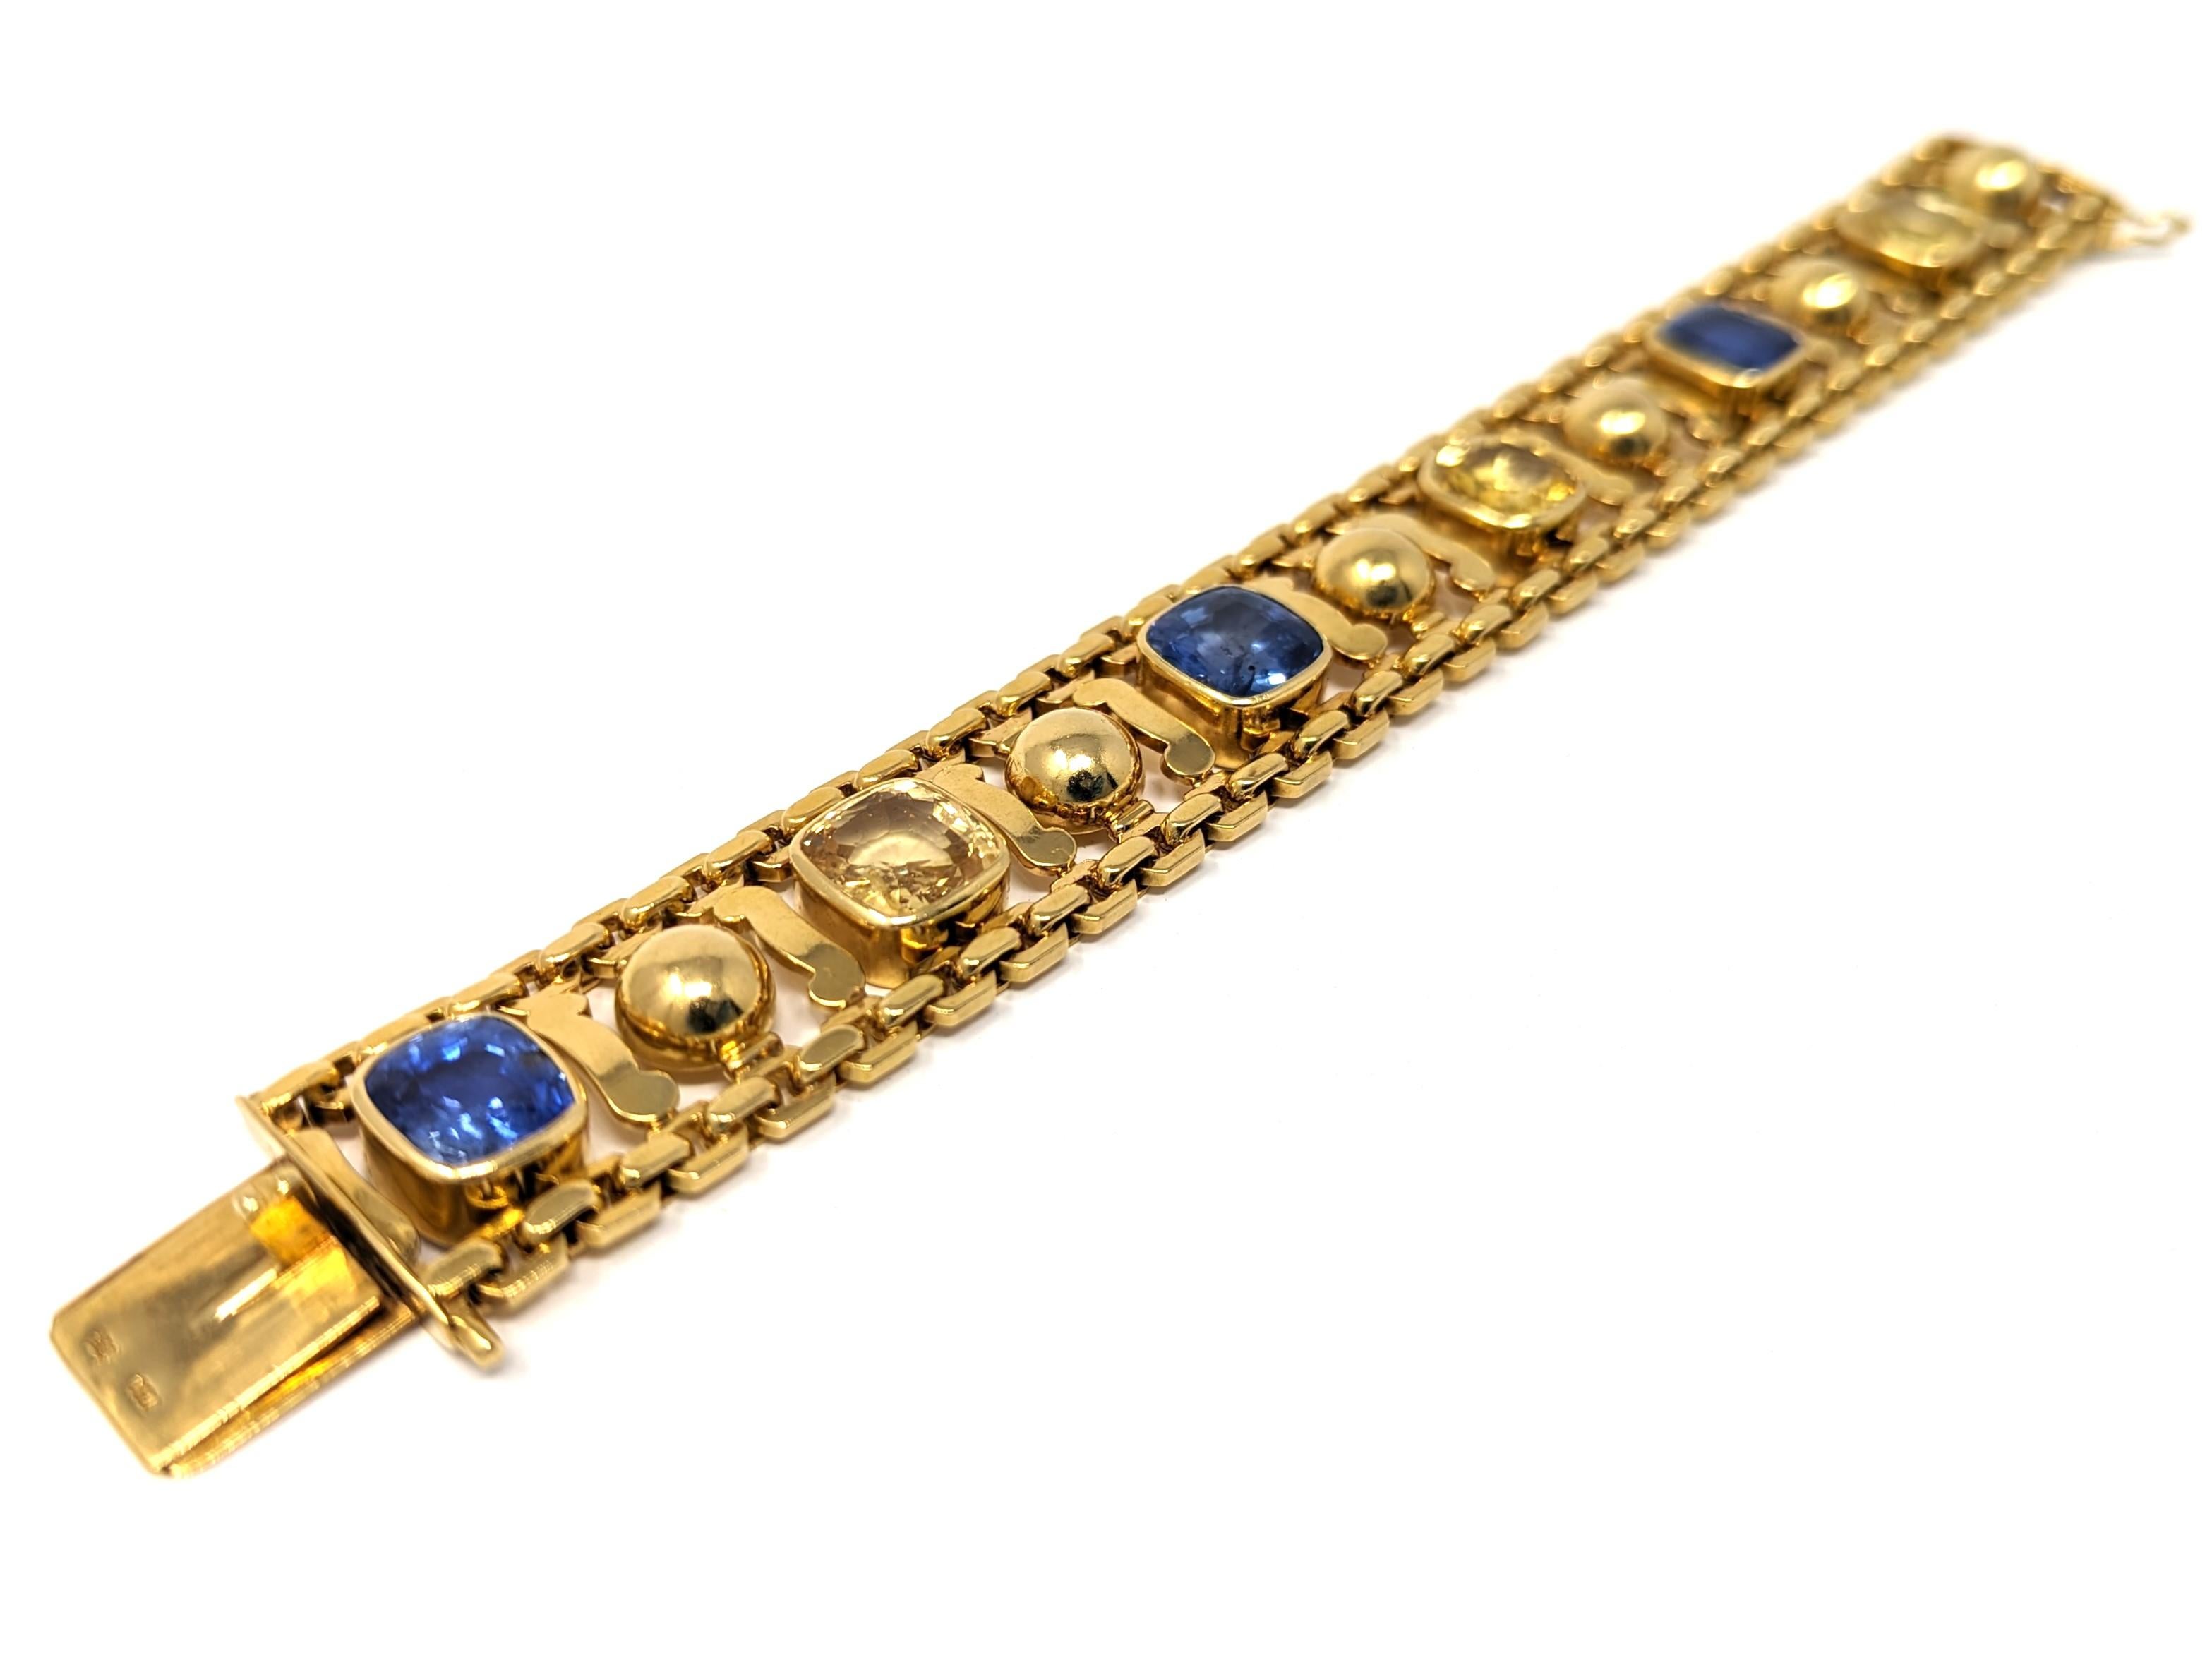 Lady's sapphire bracelet is made in 18 karat yellow gold, stamped 750, bears an abstract emblem / hallmark. Weighs 61.5 pennyweights. Cast and hand assembled construction, bright finish, workmanship shows good attention to detail, well finished,